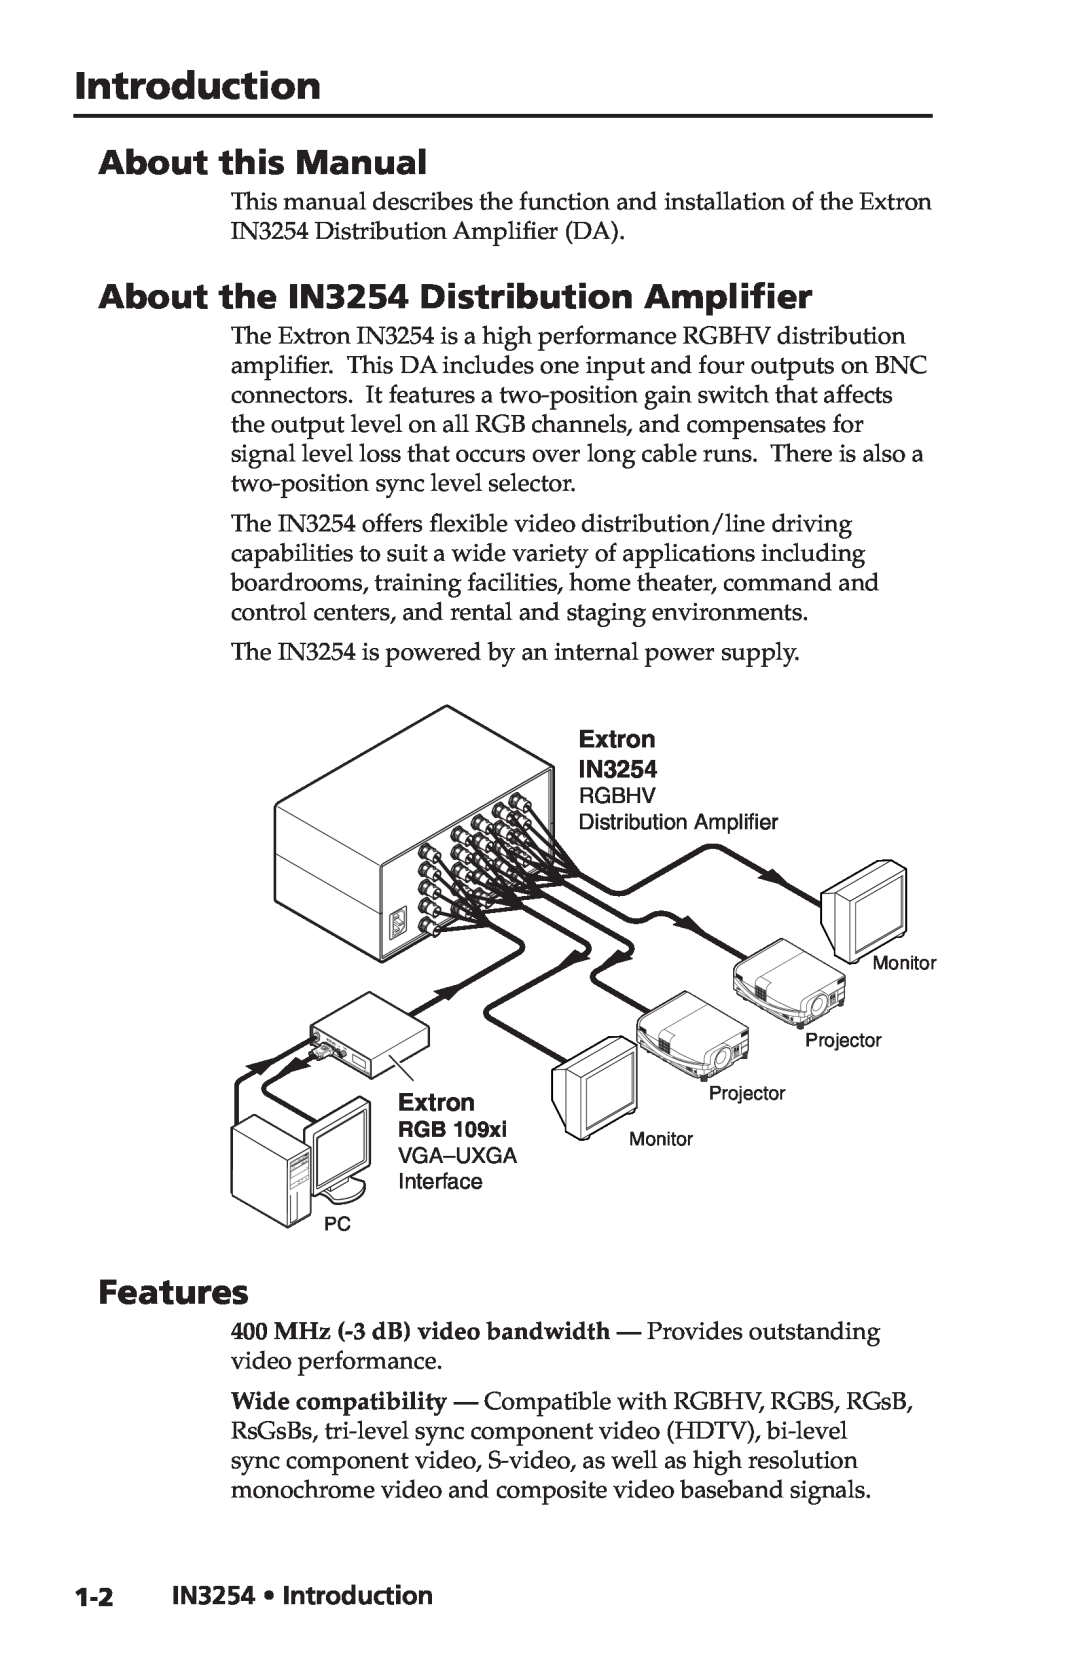 Extron electronic Introduction, About this Manual, About the IN3254 Distribution Amplifier, Features, Extron IN3254 